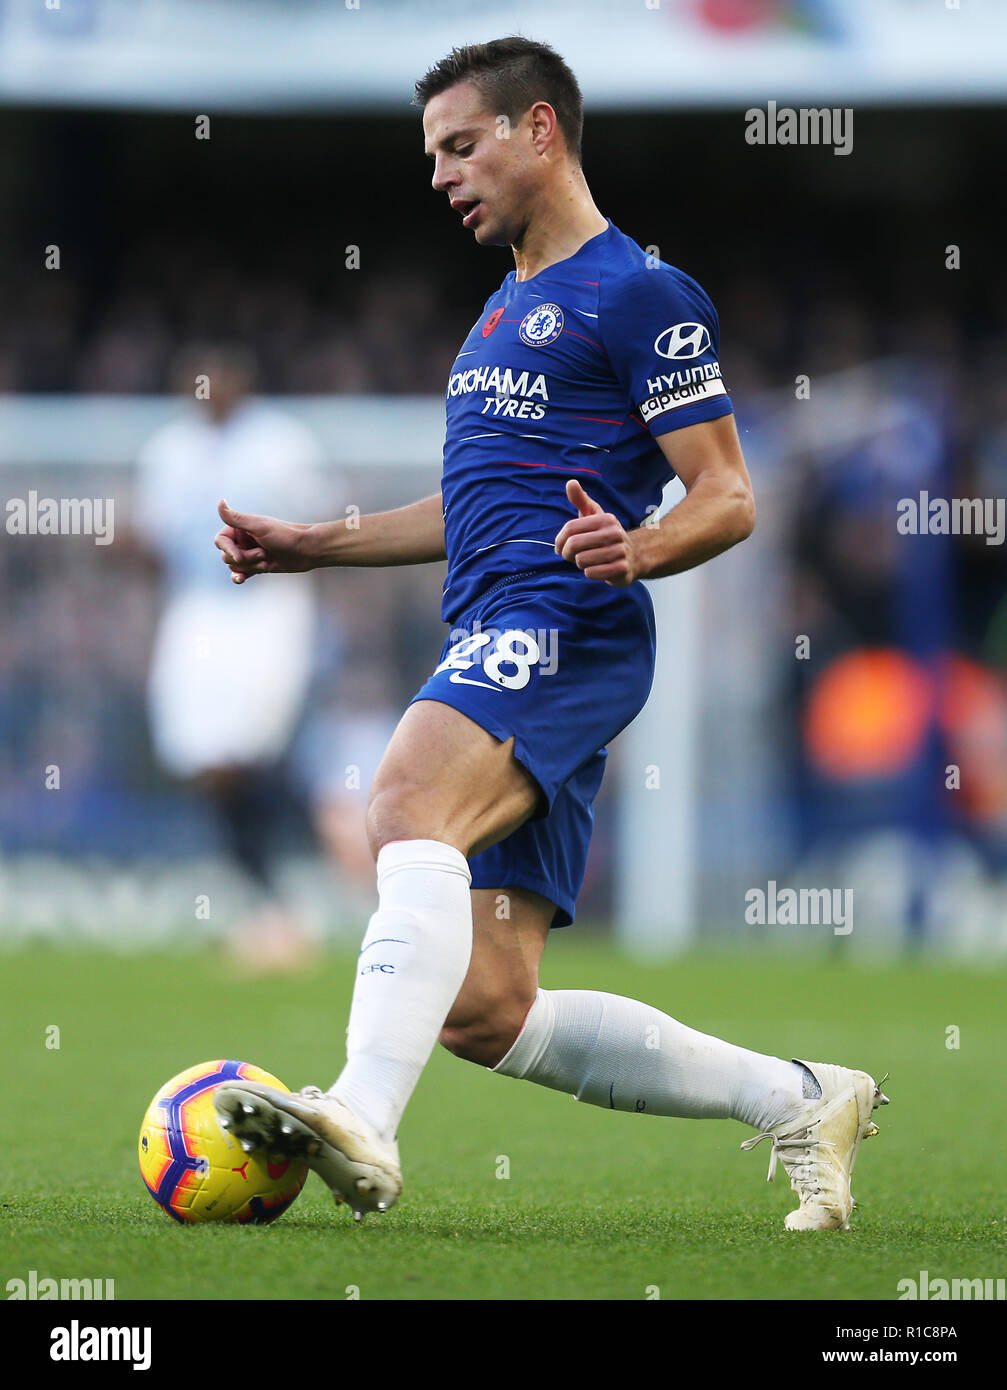 Chelsea's Cesar Azpilicueta in action during the Premier League match at Stamford Bridge, London. PRESS ASSOCIATION Photo. Picture date: Sunday November 11, 2018. See PA story SOCCER Chelsea. Photo credit should read: Steven Paston/PA Wire. RESTRICTIONS: No use with unauthorised audio, video, data, fixture lists, club/league logos or 'live' services. Online in-match use limited to 120 images, no video emulation. No use in betting, games or single club/league/player publications. Stock Photo